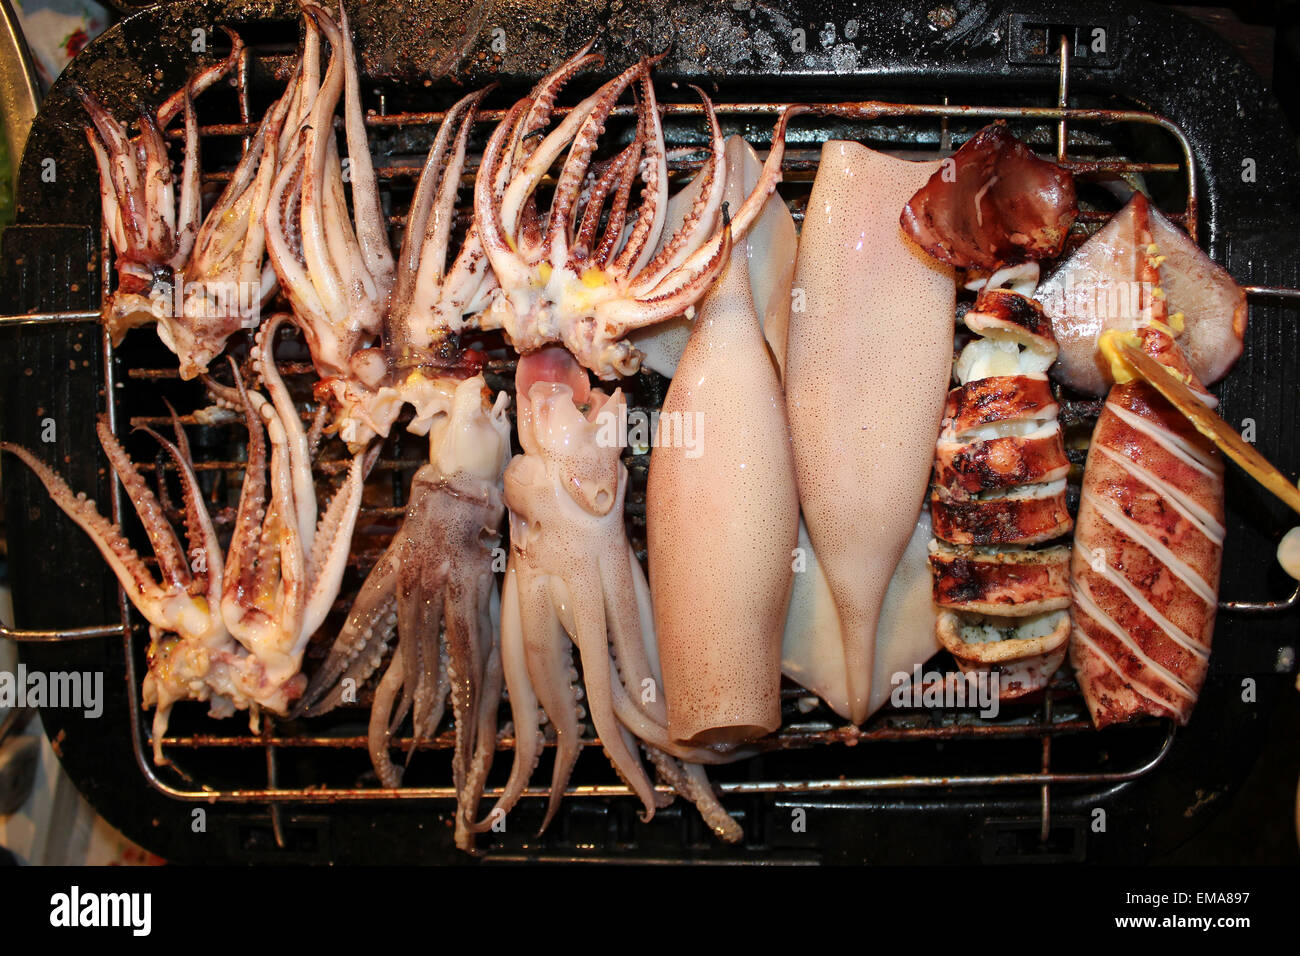 Squid Grilling On Barb-b-que Stock Photo